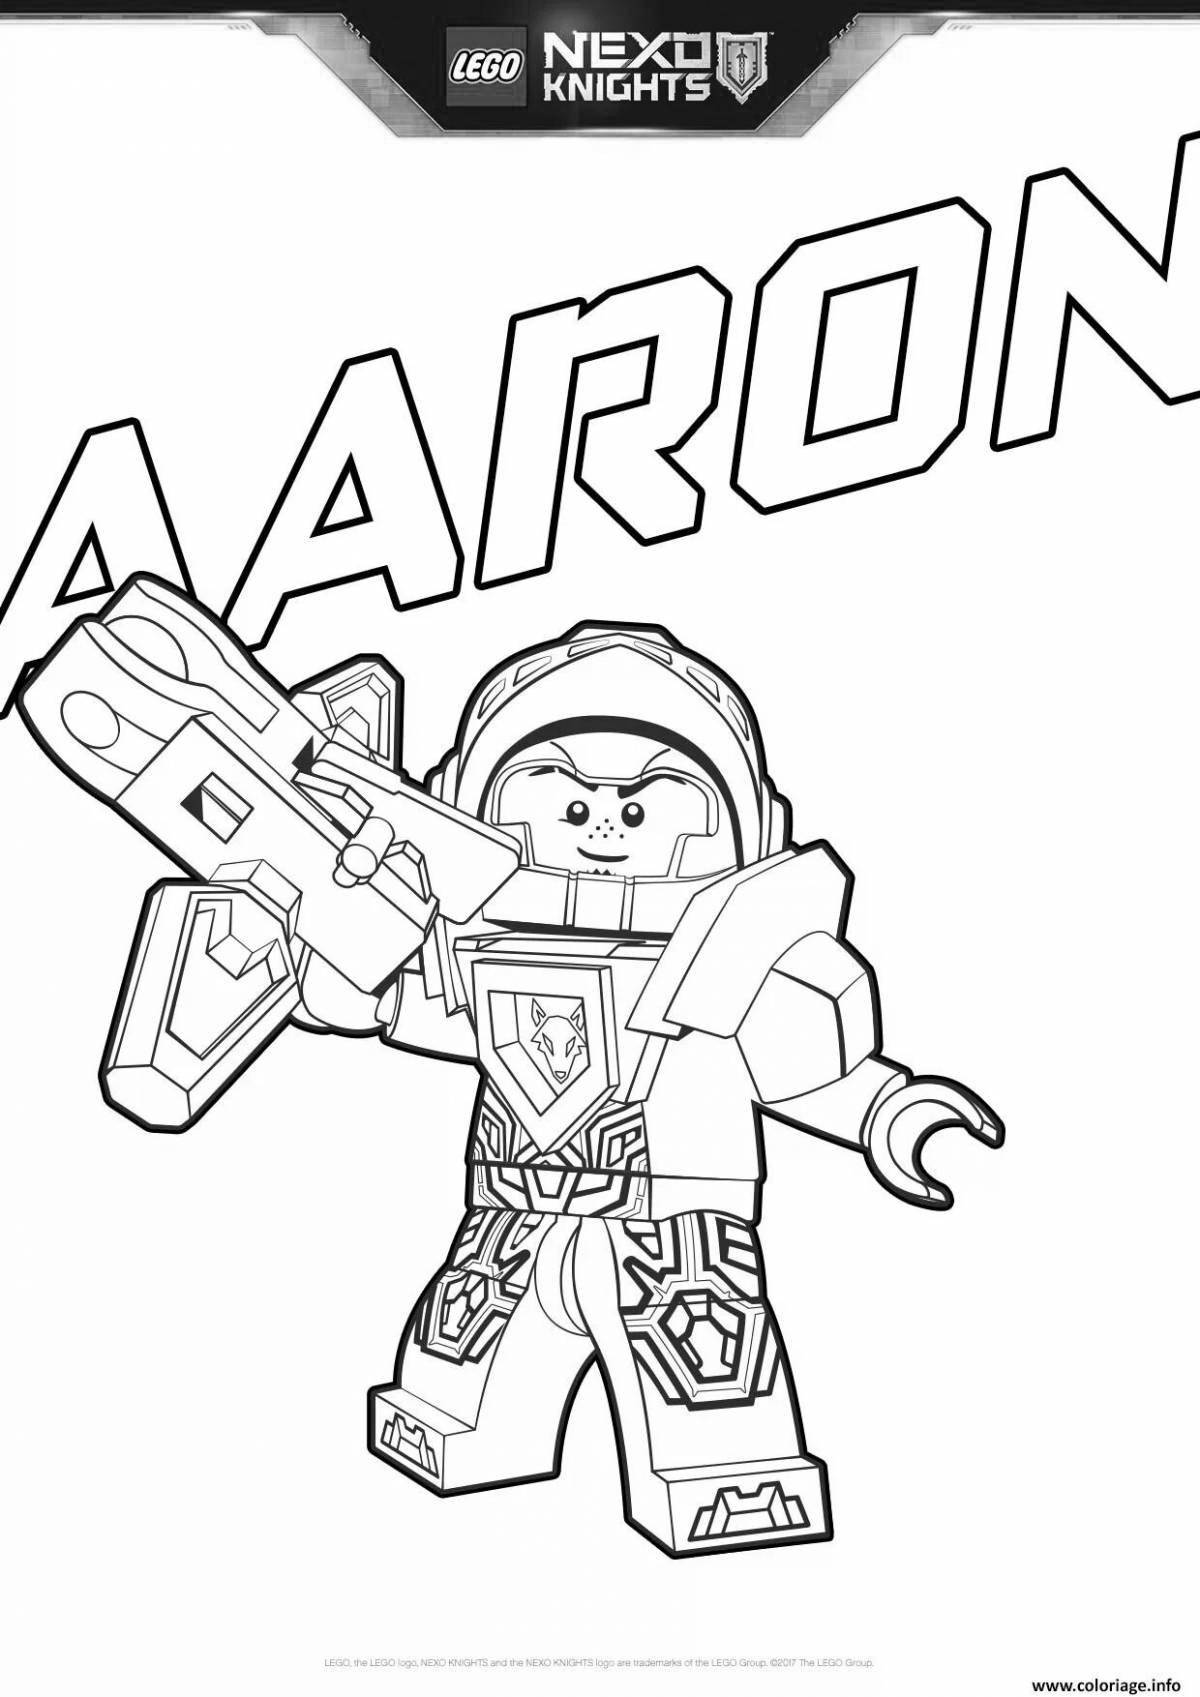 Nexo deluxe knights coloring page